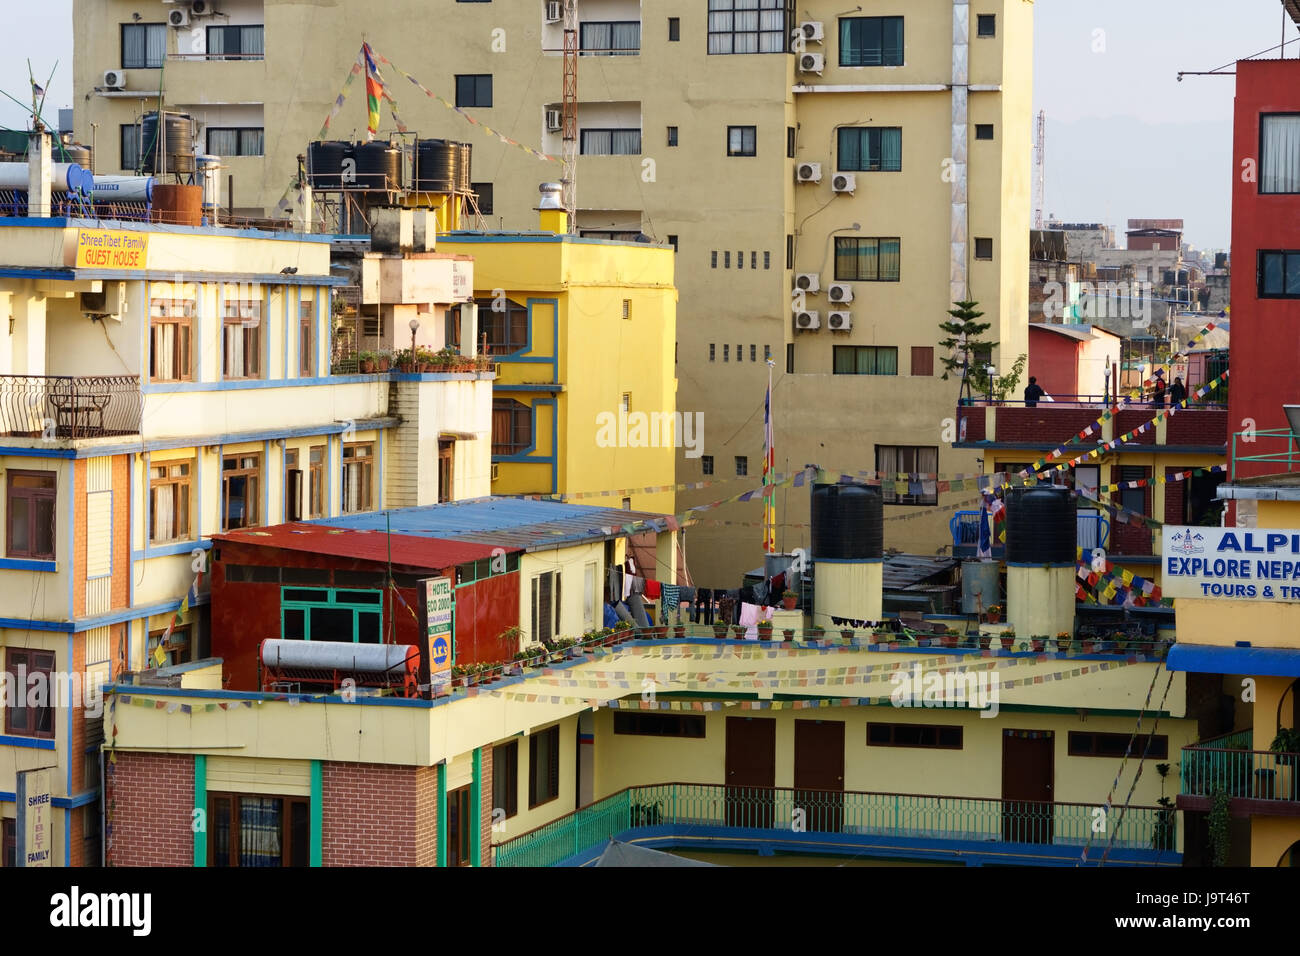 Colorful buildings in the district of Thamel, Kathmandu, Nepal. Stock Photo